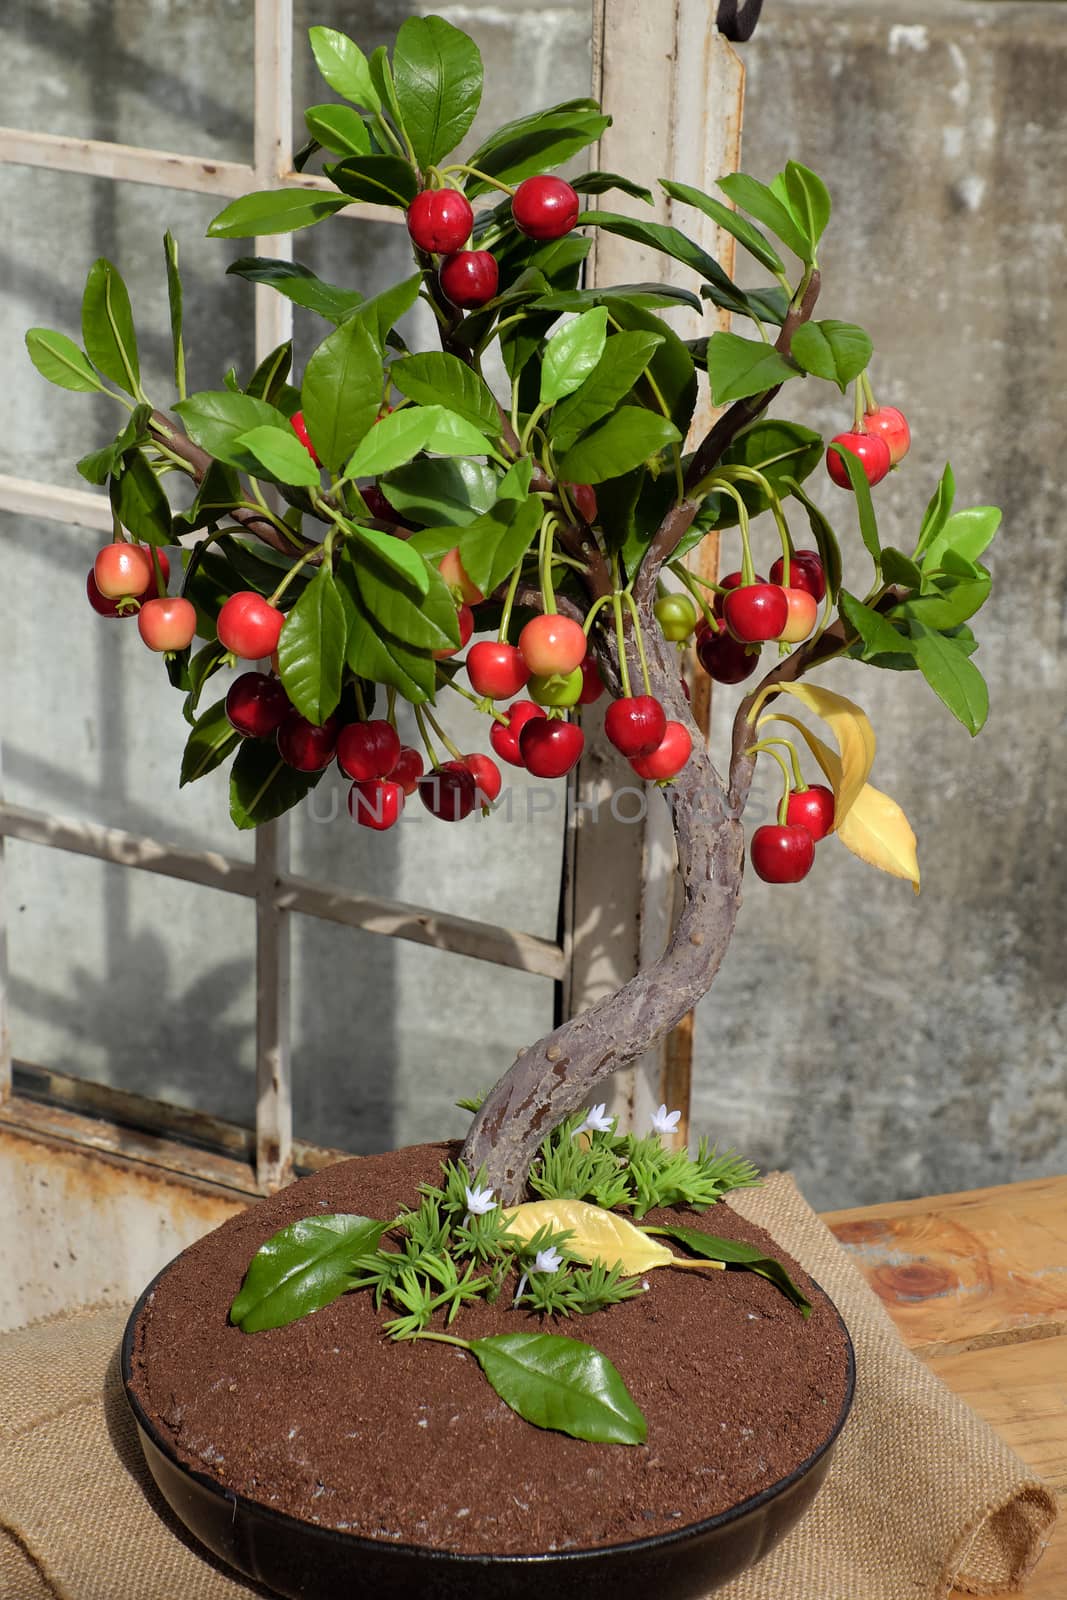 Cherry tree with red ripe fruit make from clay, handmade bonsai tree for home decoration in Vietnam, beautiful artwork for springtime